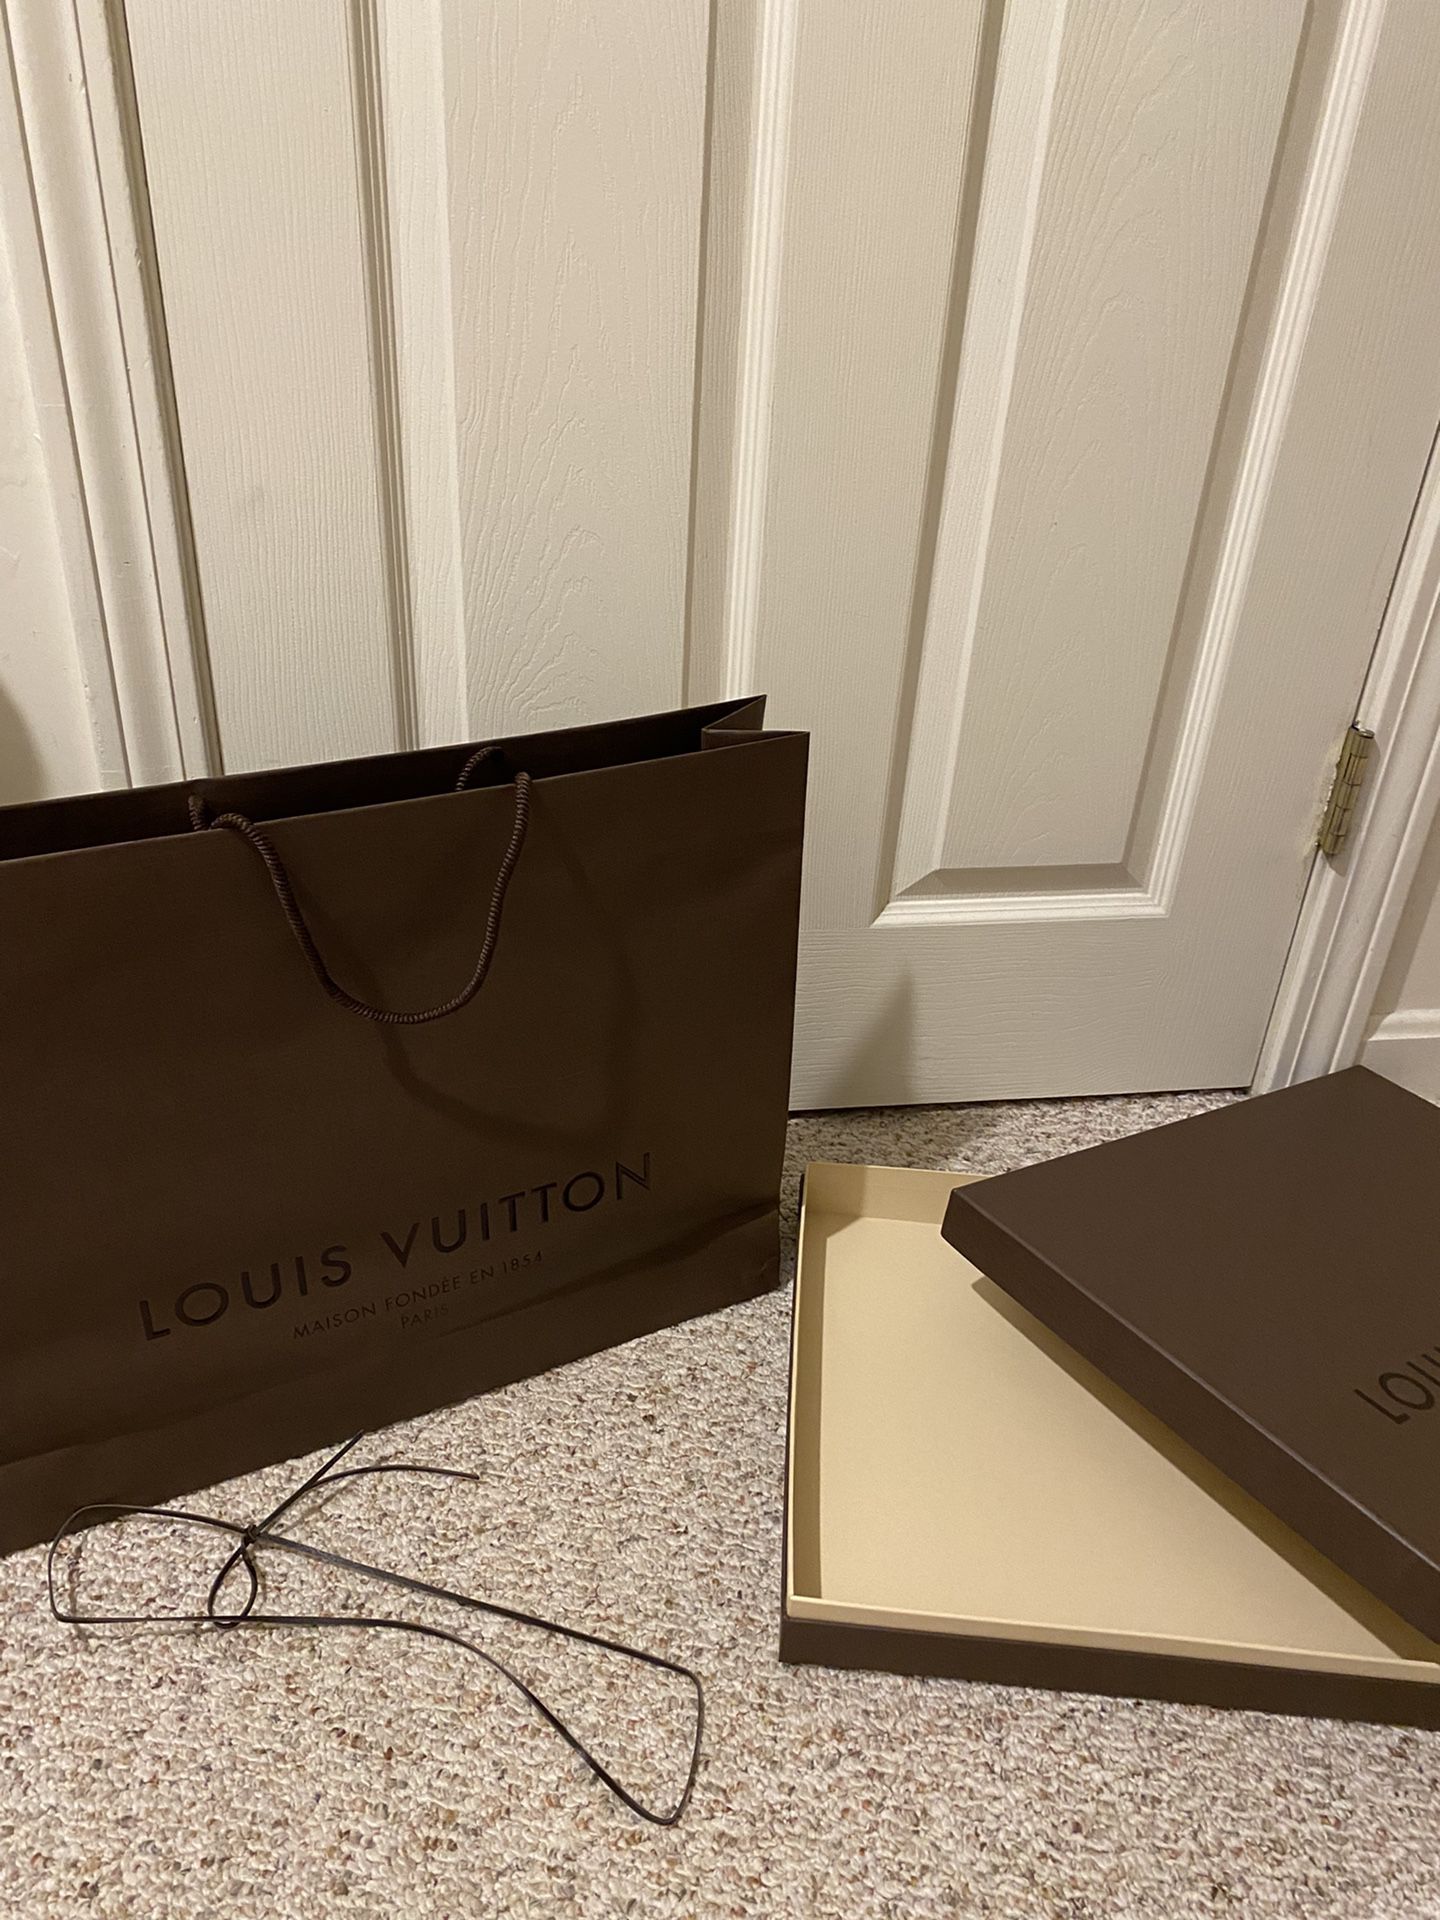 Louis Vuitton Shopping Bag And Box (empty) for Sale in North Providence, RI  - OfferUp